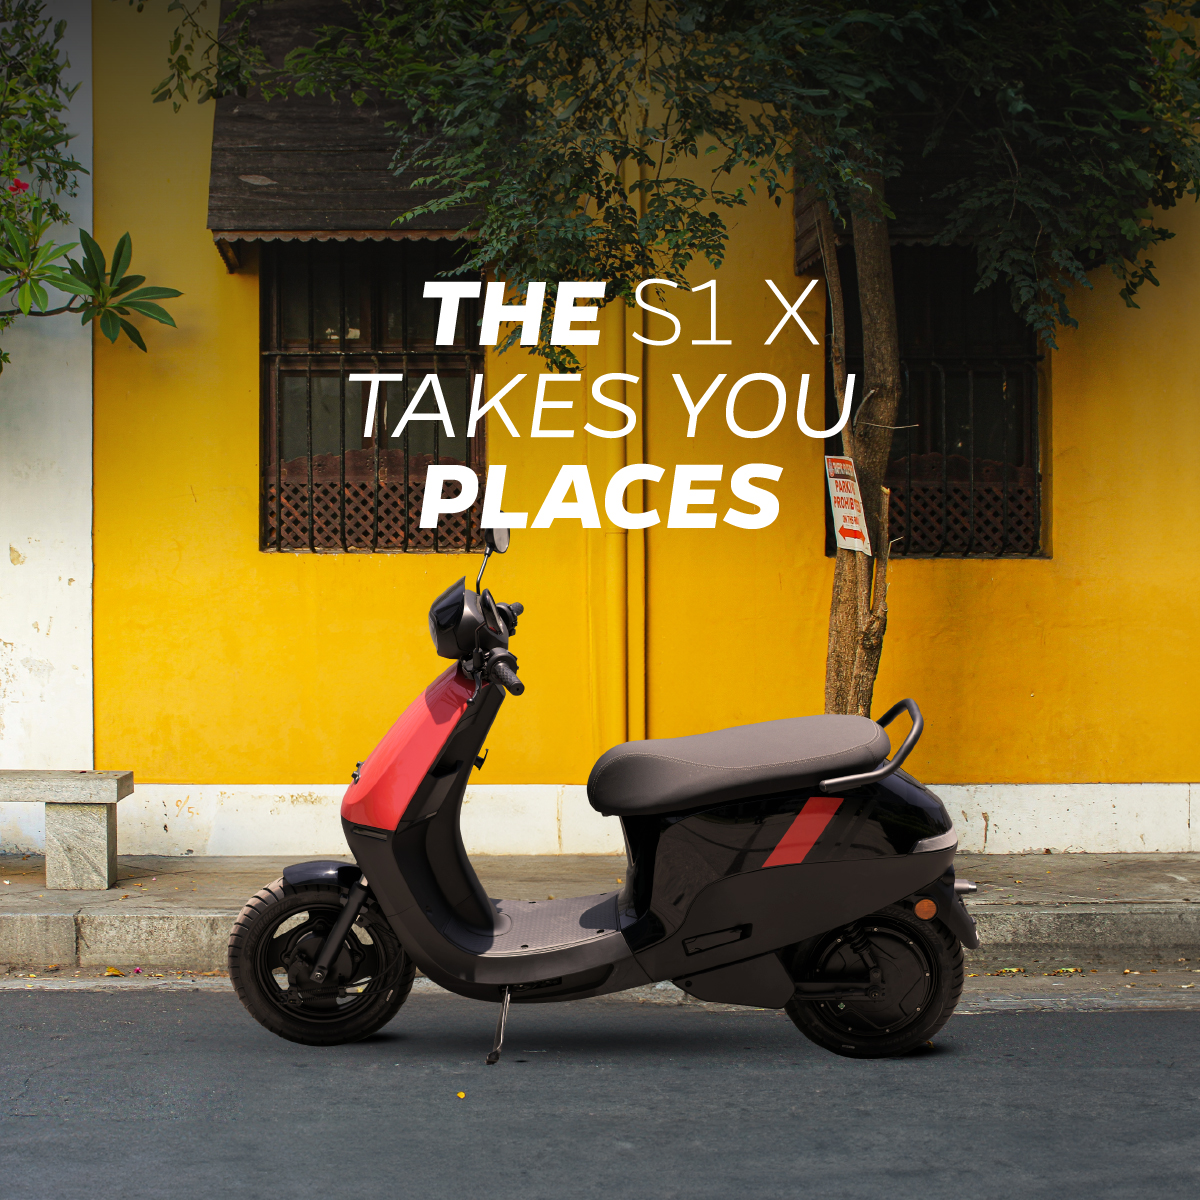 Go here. Go there. Go anywhere. With up to 190km Range on the S1 X, no place is too far.